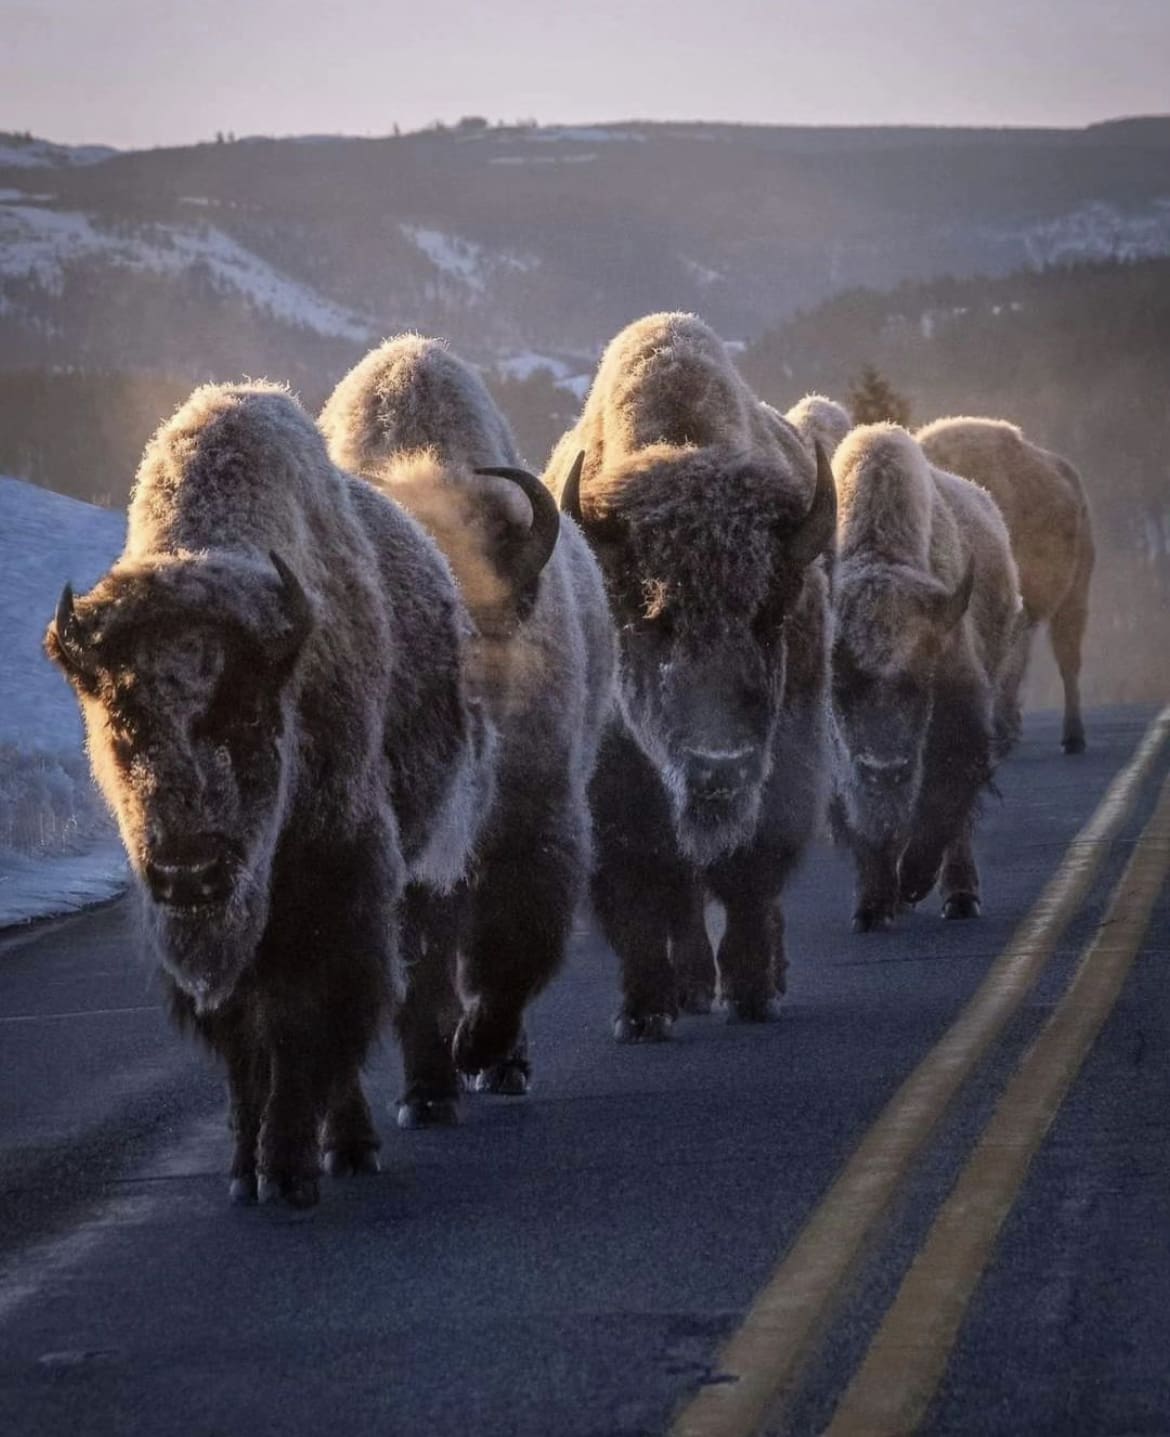 Bison in the road, Yellowstone